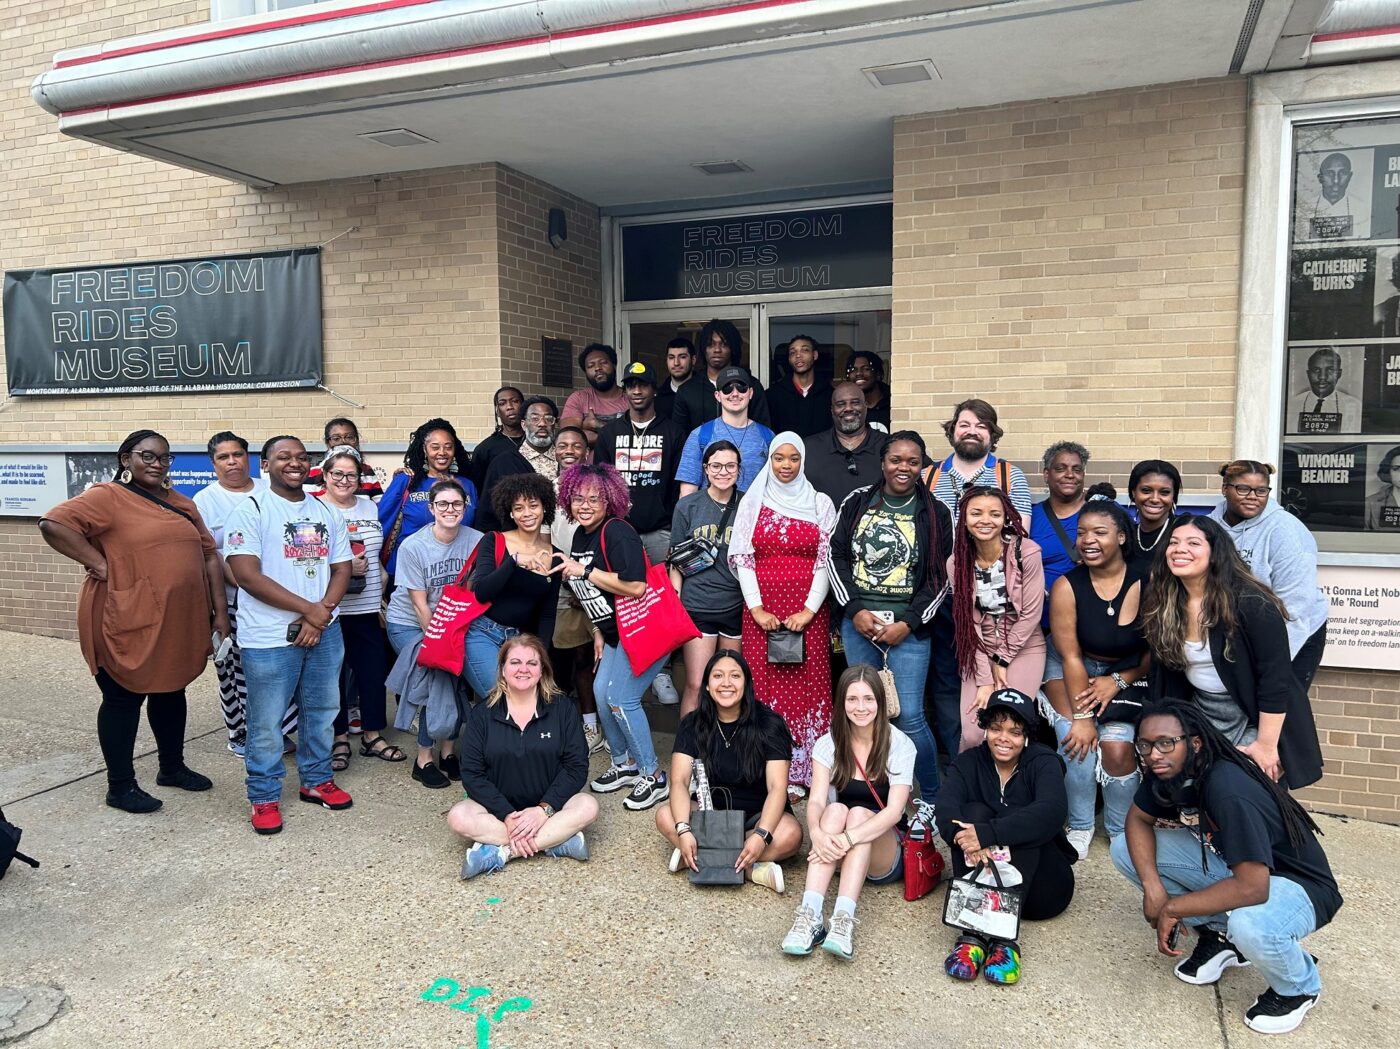 A group of students and chaperones pose for a photo in front of the Freedom Rides Museum.